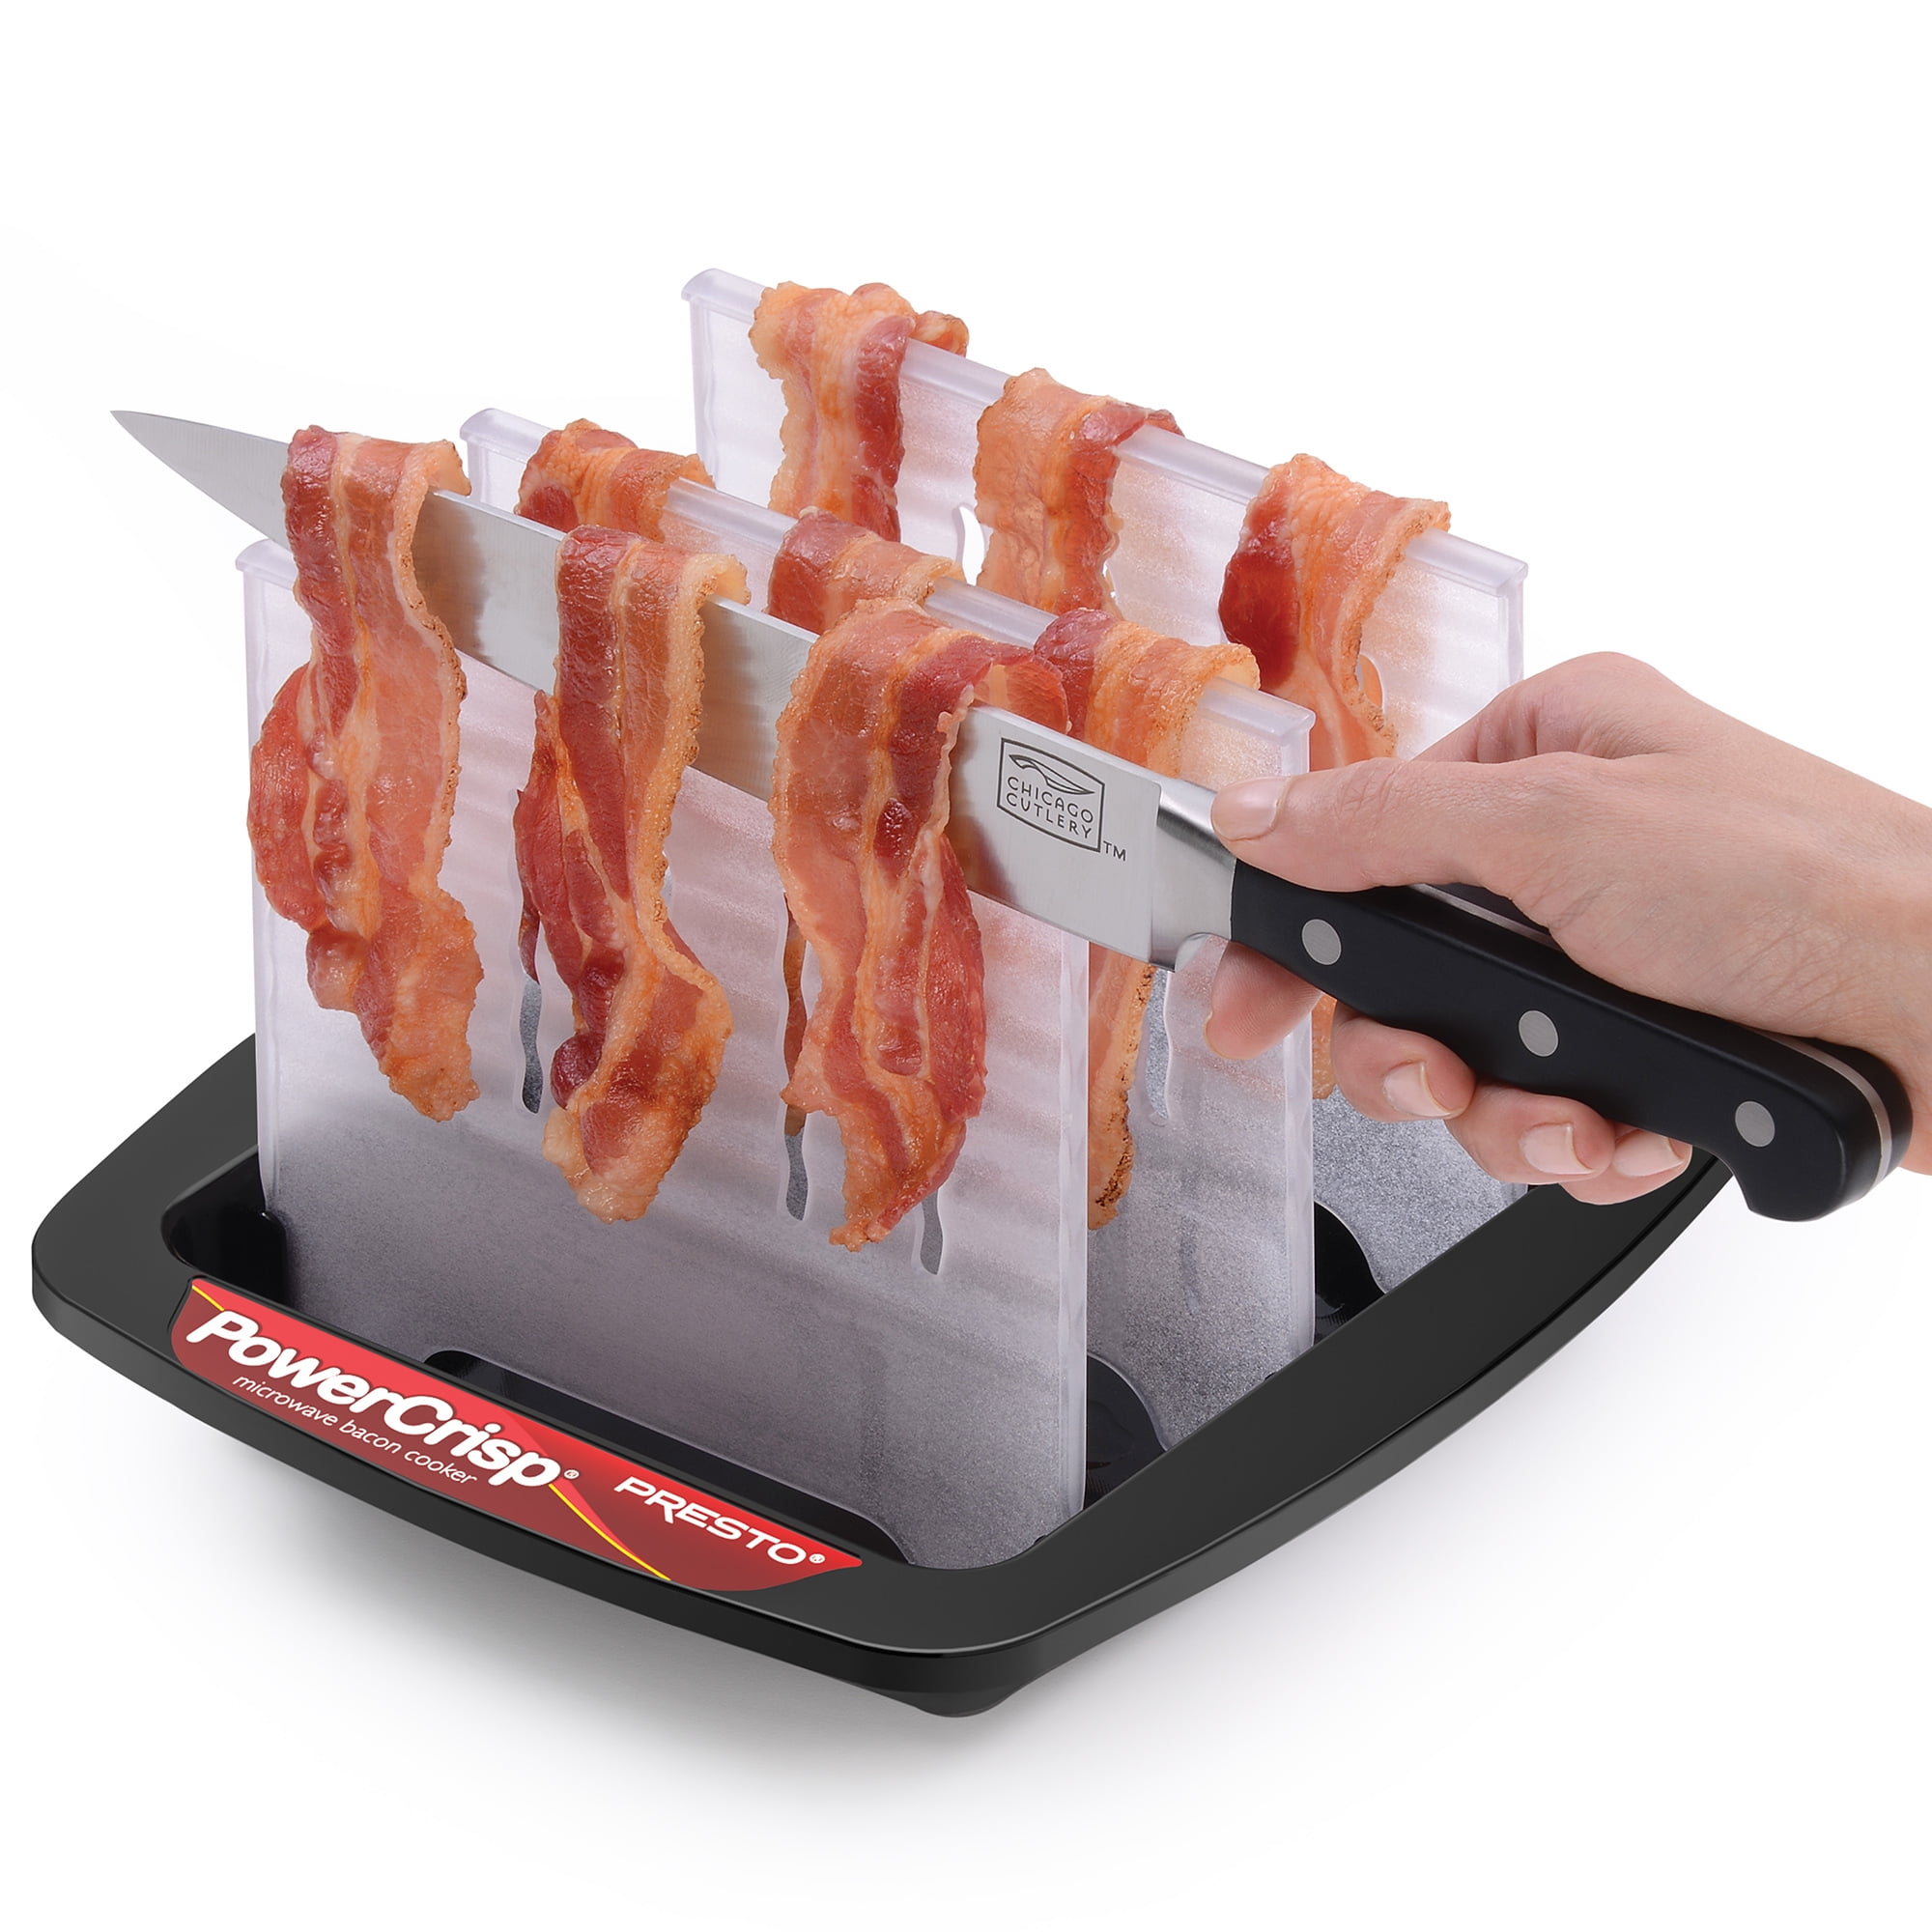 1pc Microwave Bacons Cooker, Tray Rack Bacons Cooking Tool For Crisp  Breakfast Meal, Portable Original Bacon Microwave Bacon Tray, Gadgets Kit  Accesso